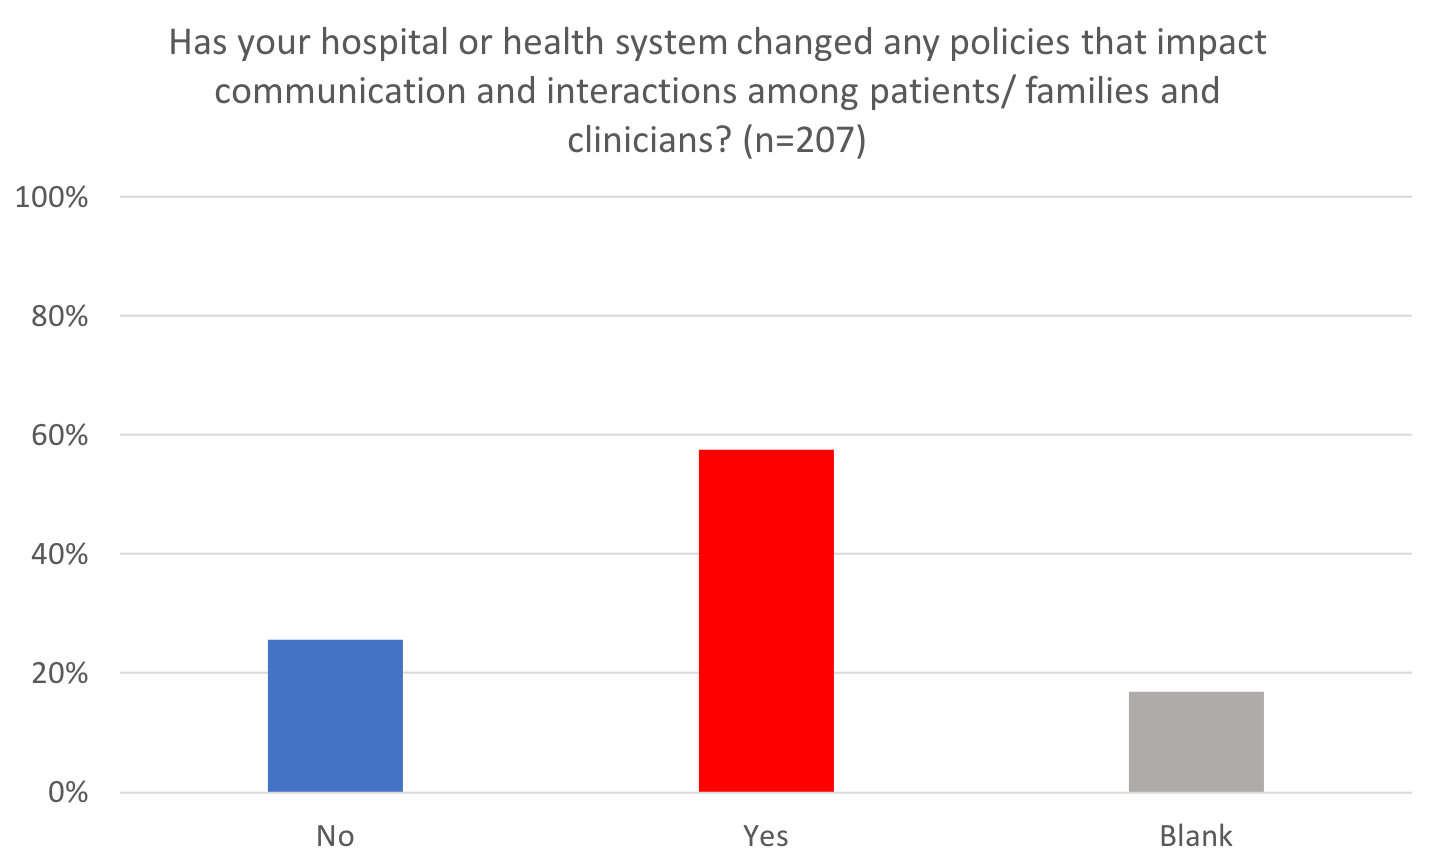 Has your hospital or health system changed any policies that impact communication and interactions among patients/ families and clinicians? (n=169)